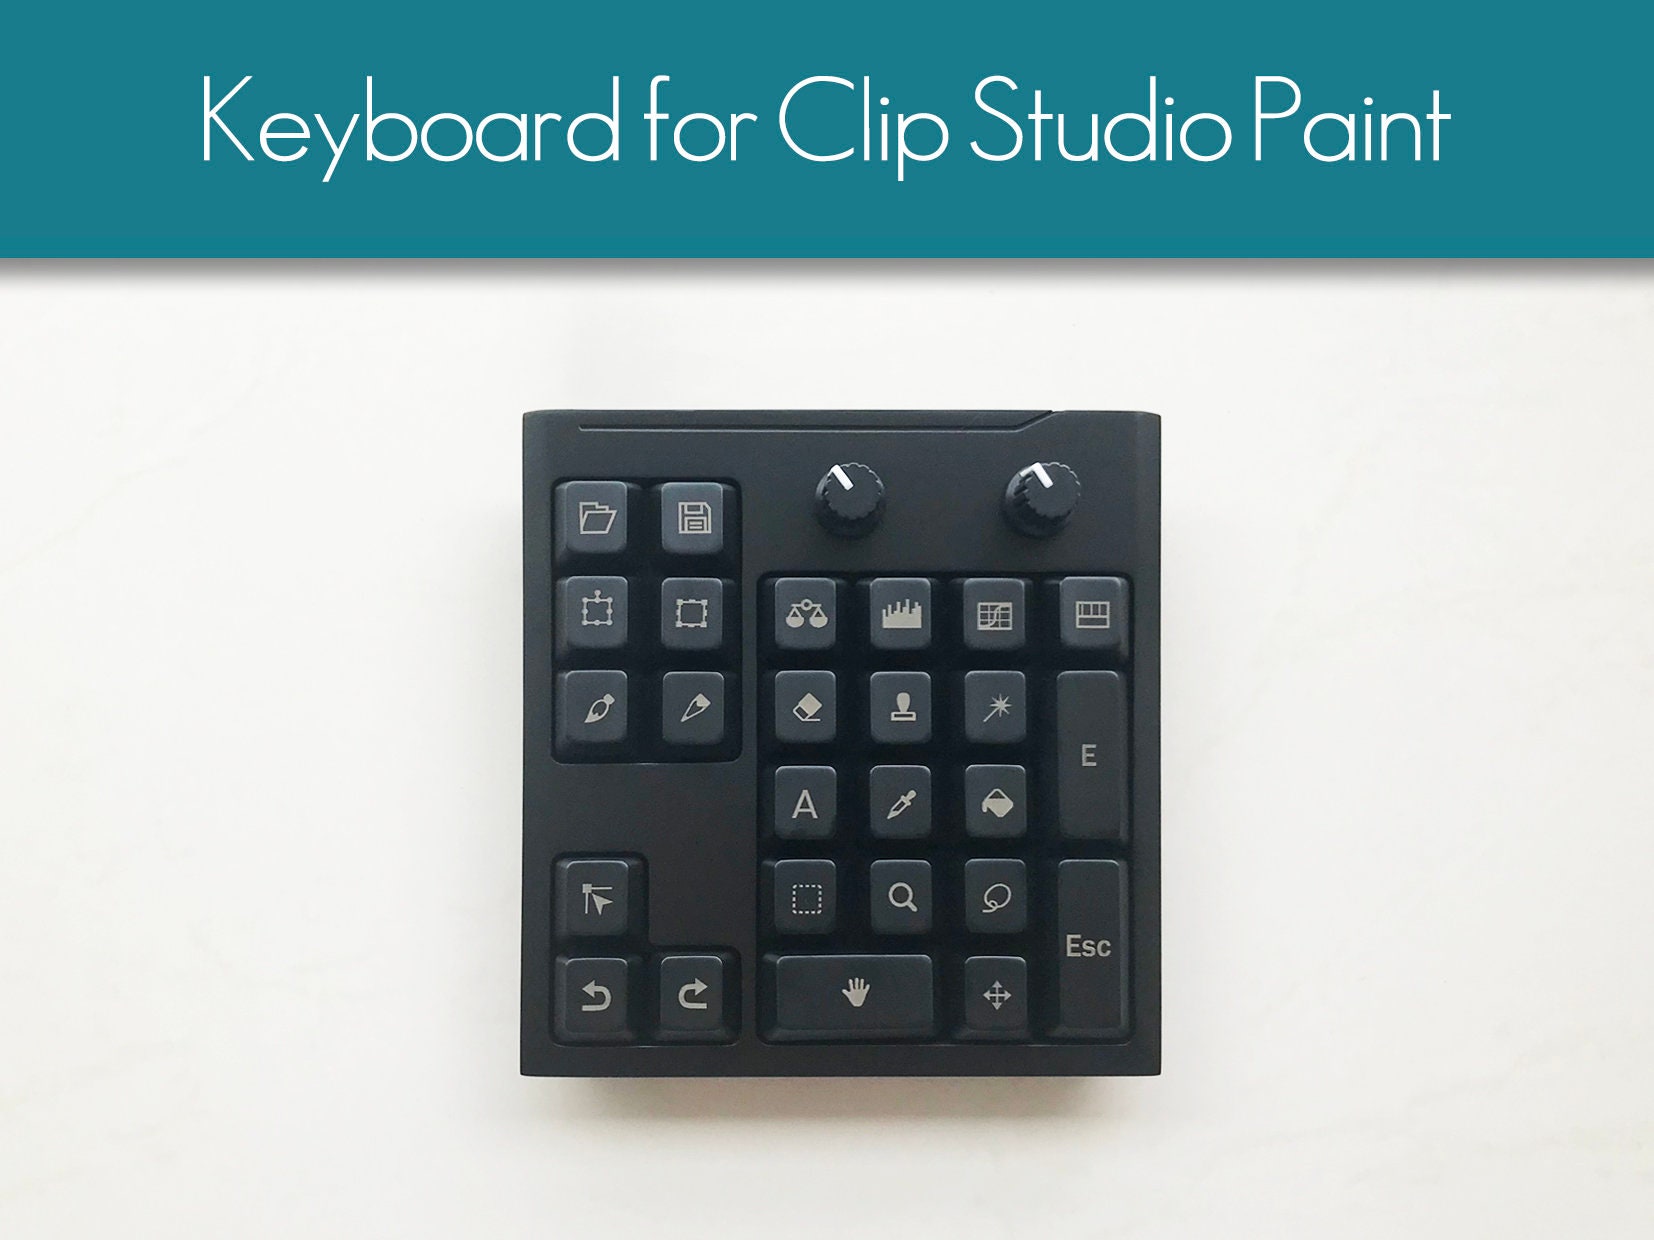 Keyboard Keypad Controller for Clip Studio Paint - Etsy